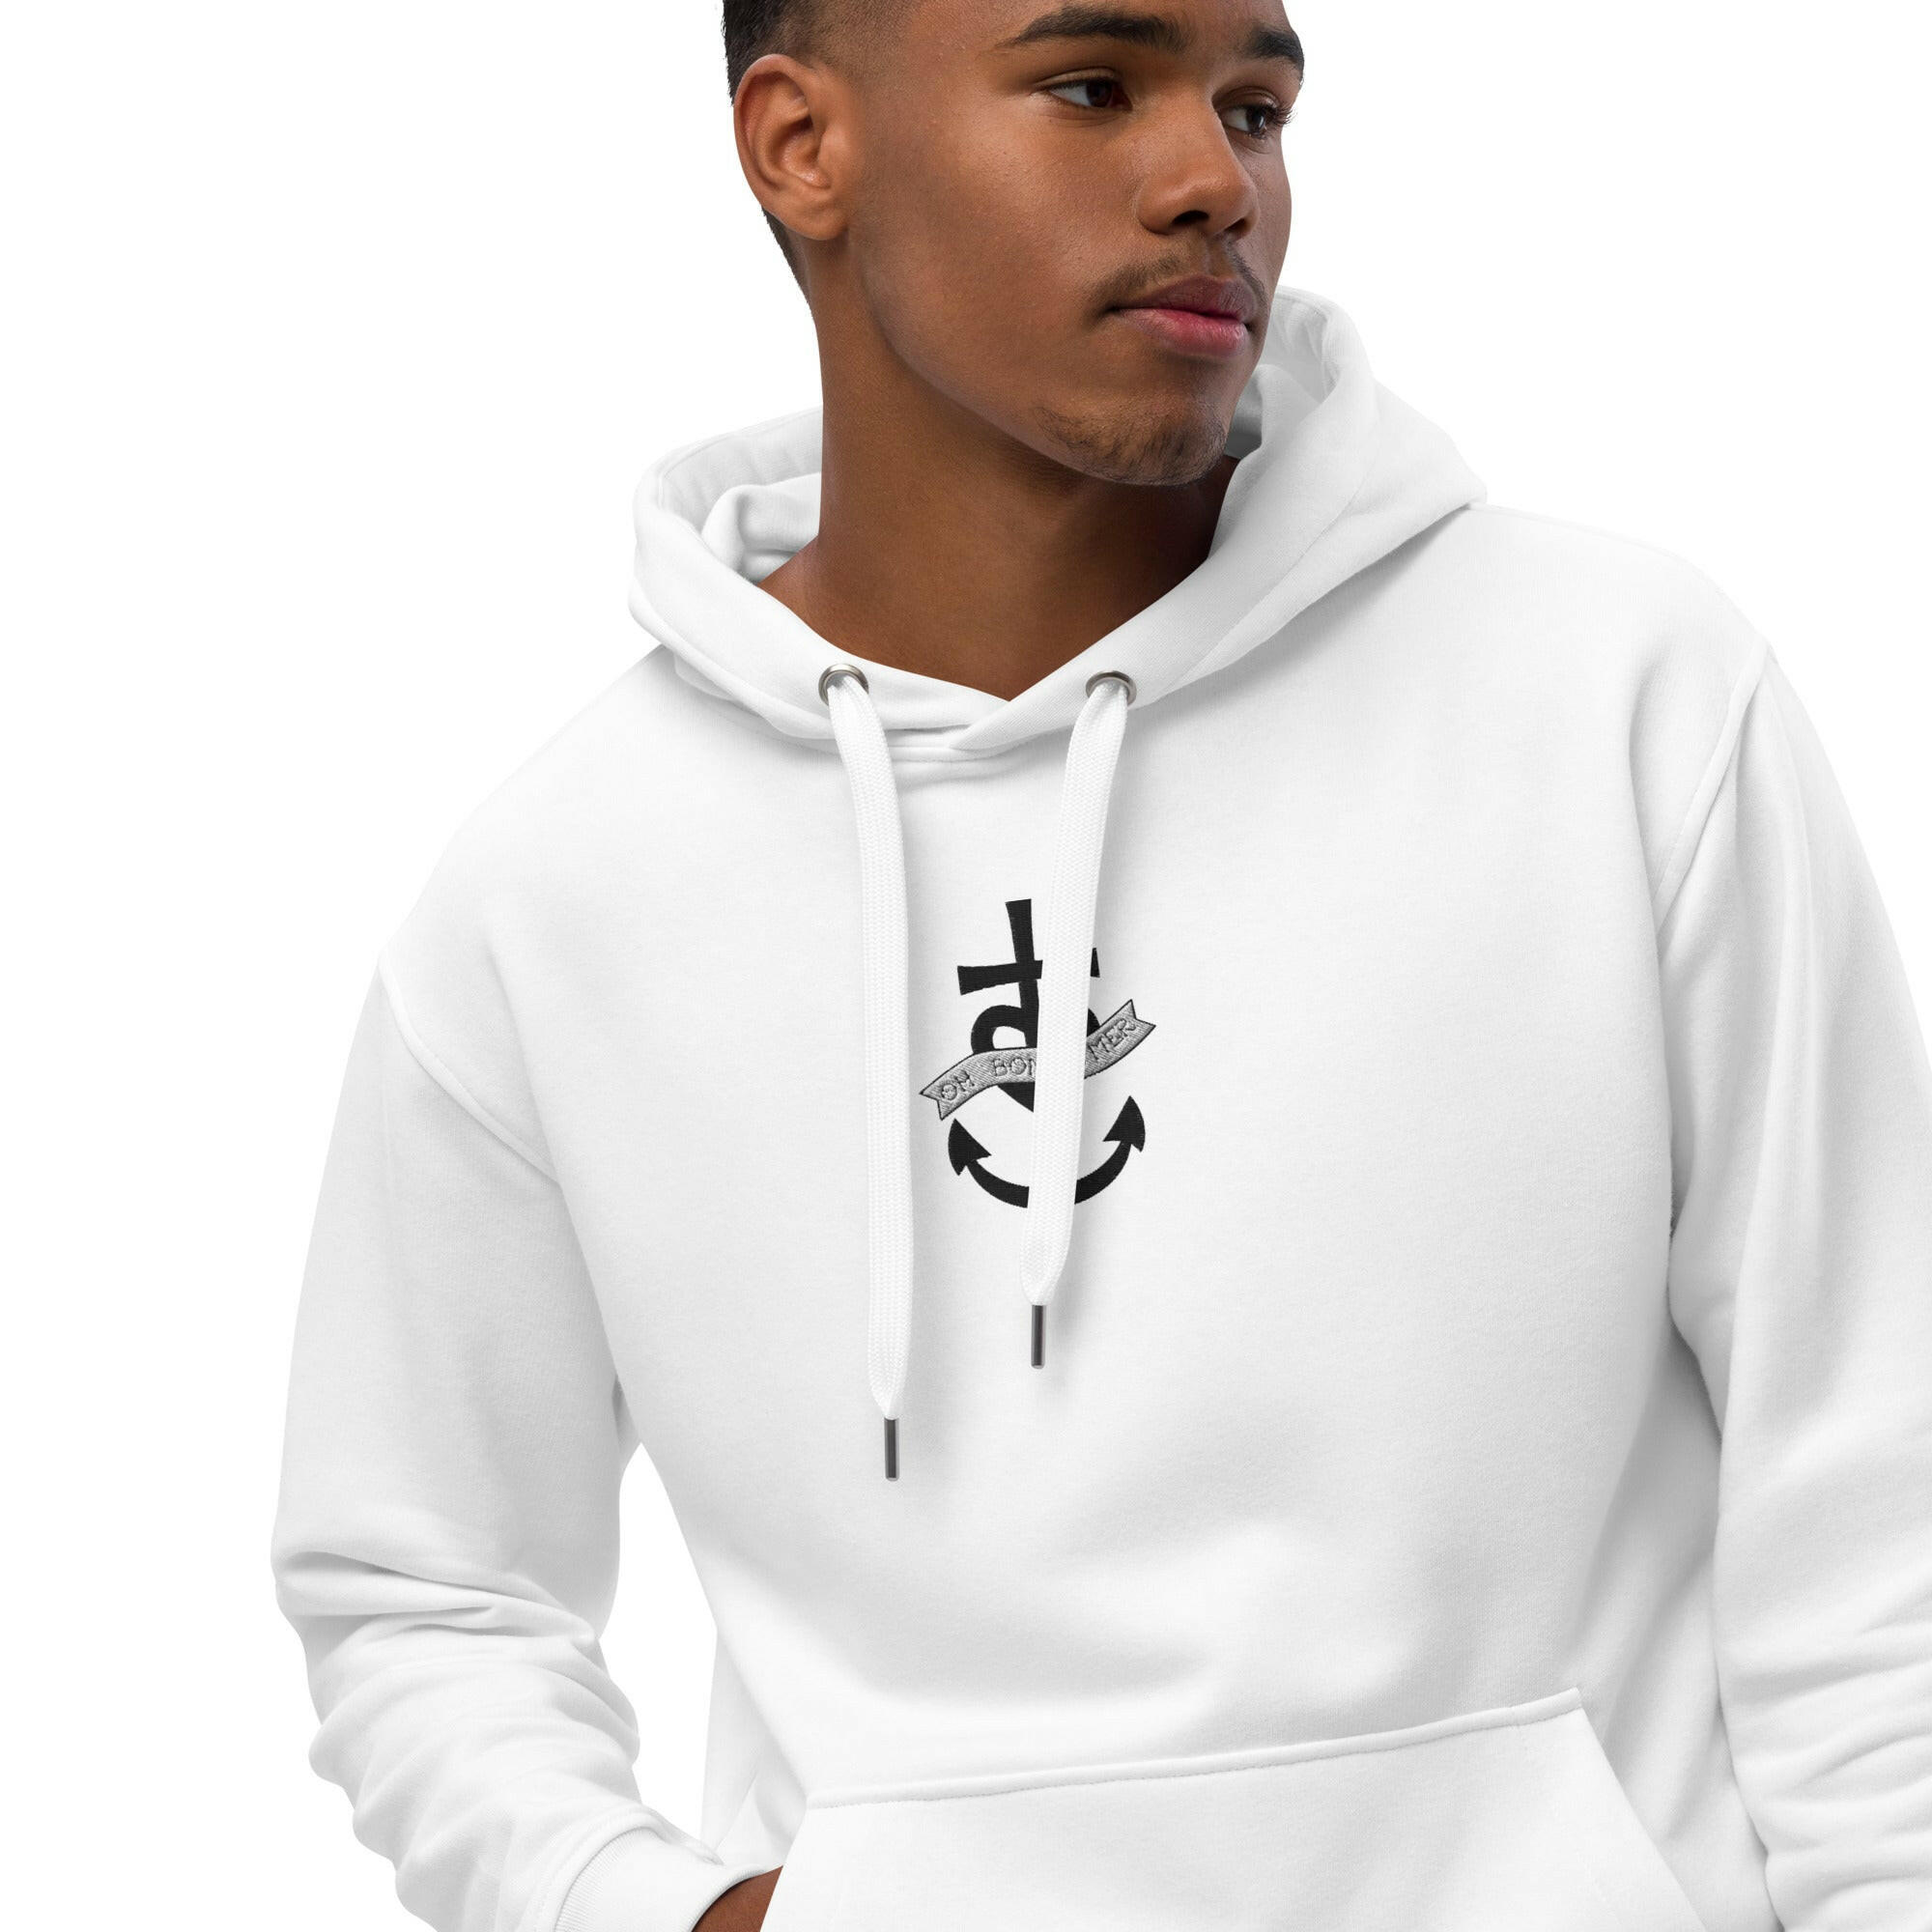 Premium eco hoodie Oh Bonne Mer 1 small embroided pattern on front